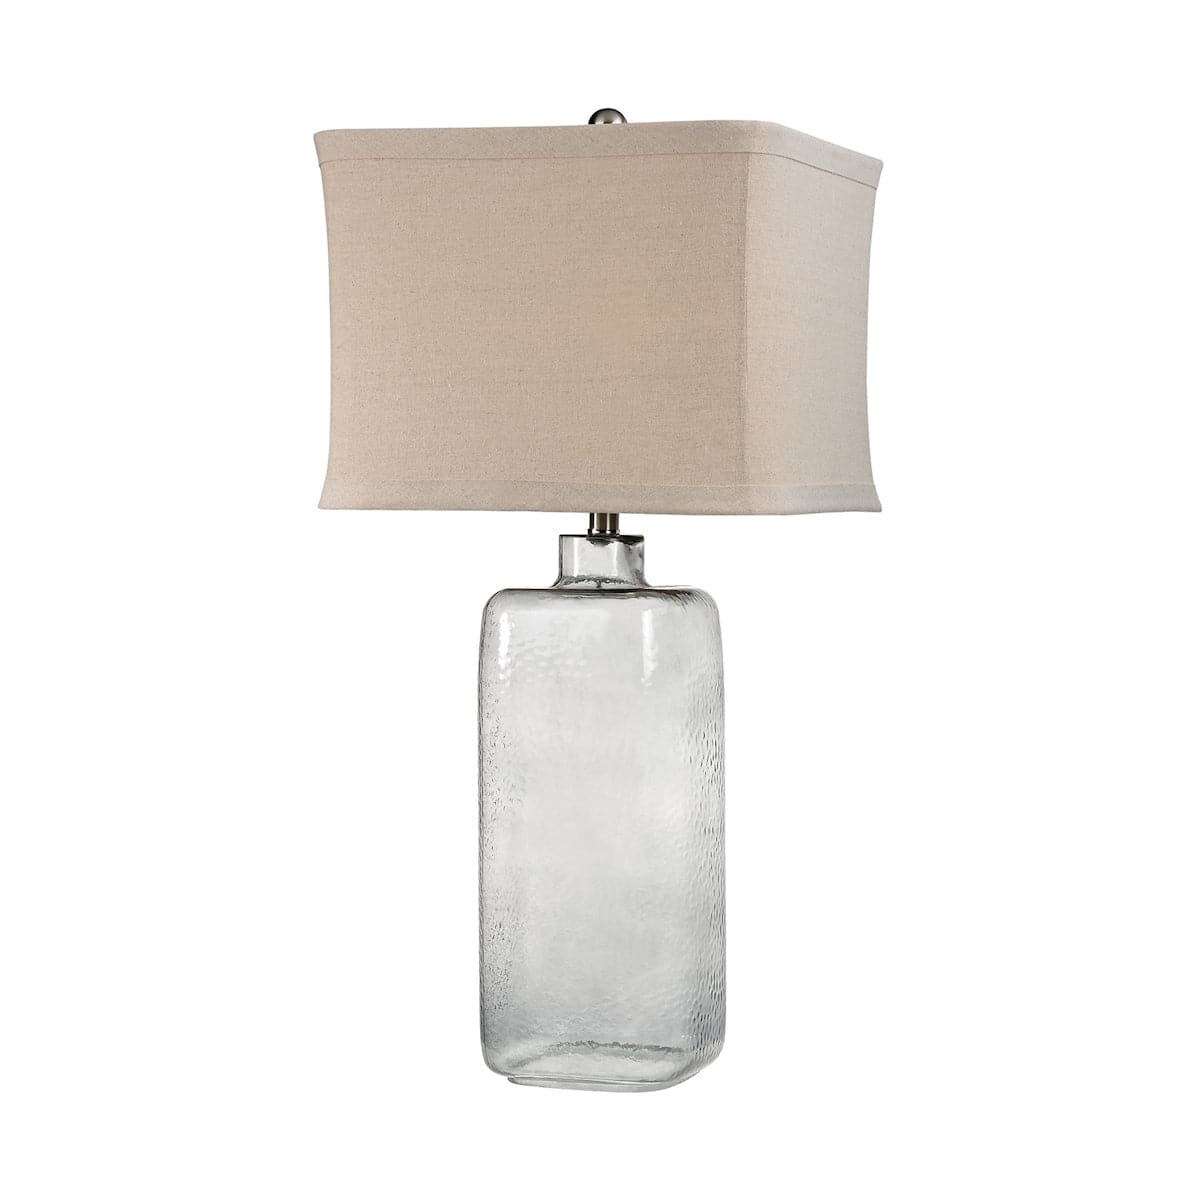 ELK Home - D2776 - One Light Table Lamp - Hammered Glass - Gray